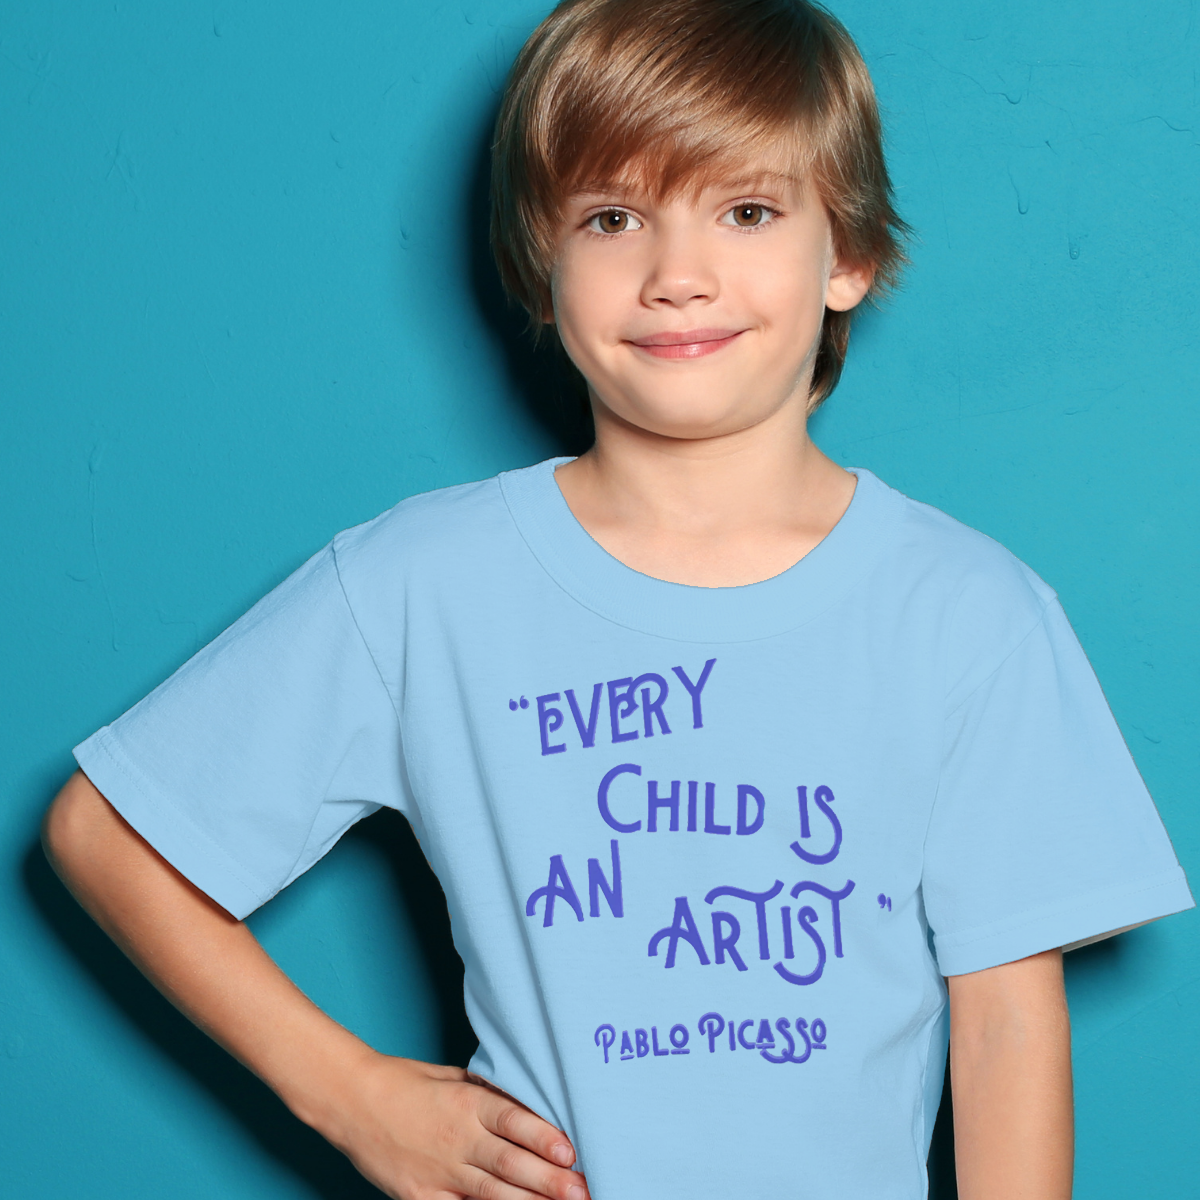 "EVERY CHILD IS AN ARTIST" PICASSO QUOTE Organic T-shirt - Mid Blue On Sky Blue